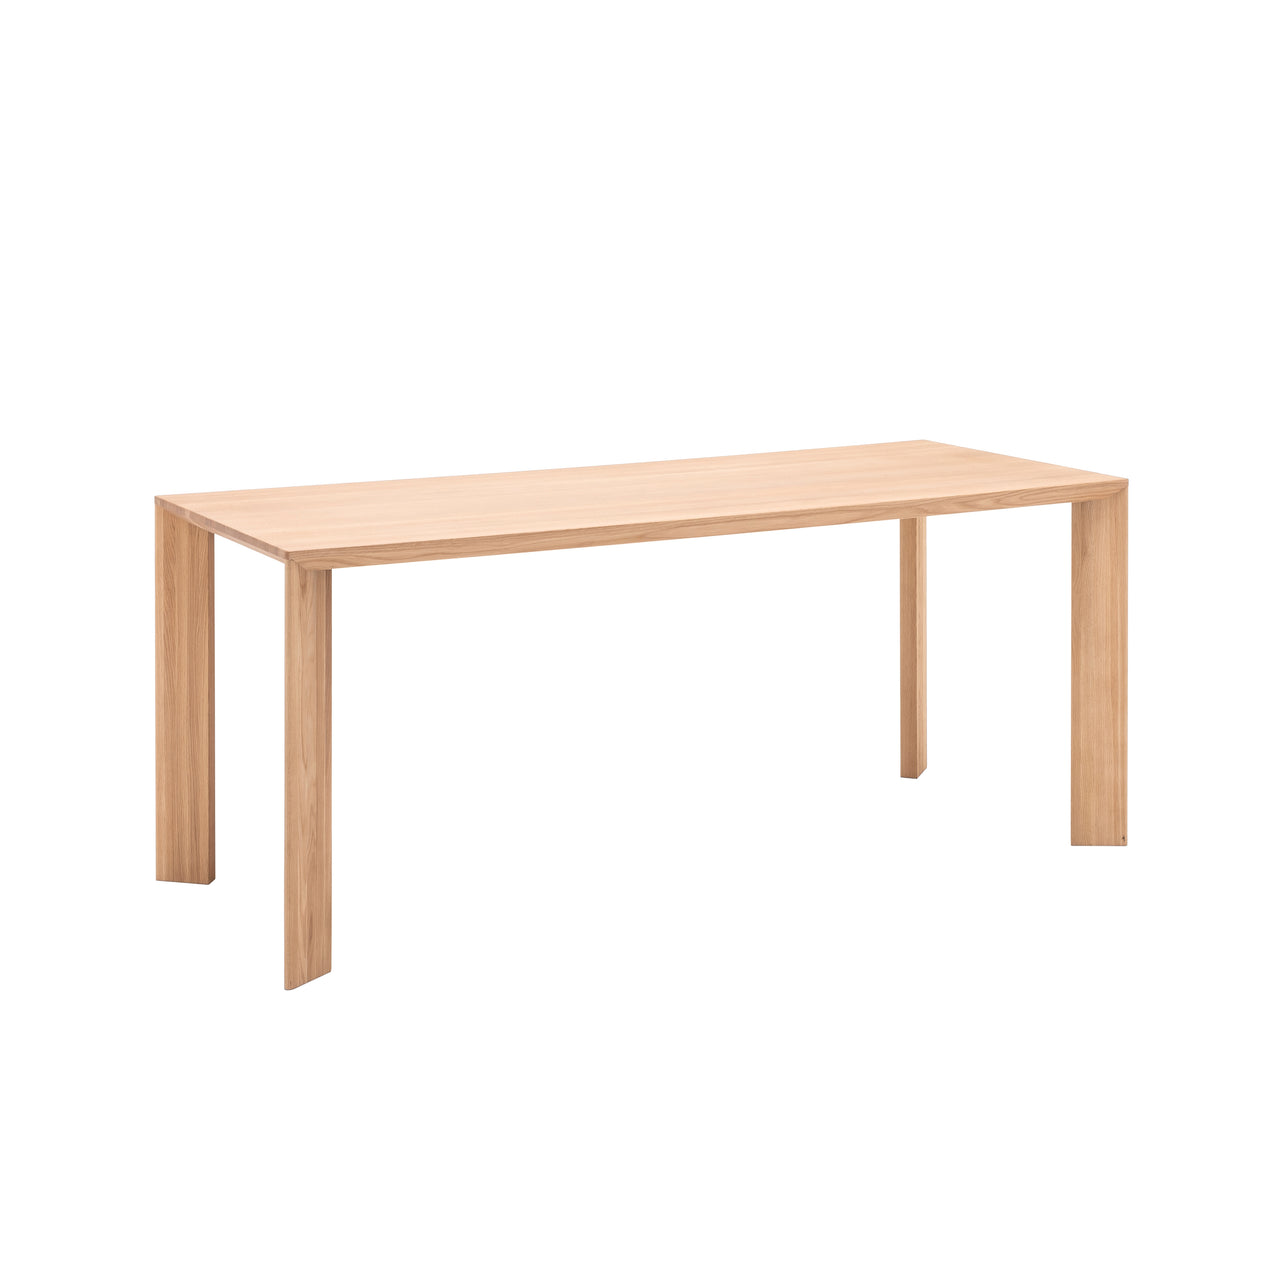 Azabu Residence Dining Table A-DT02 | Buy Karimoku online at A+R